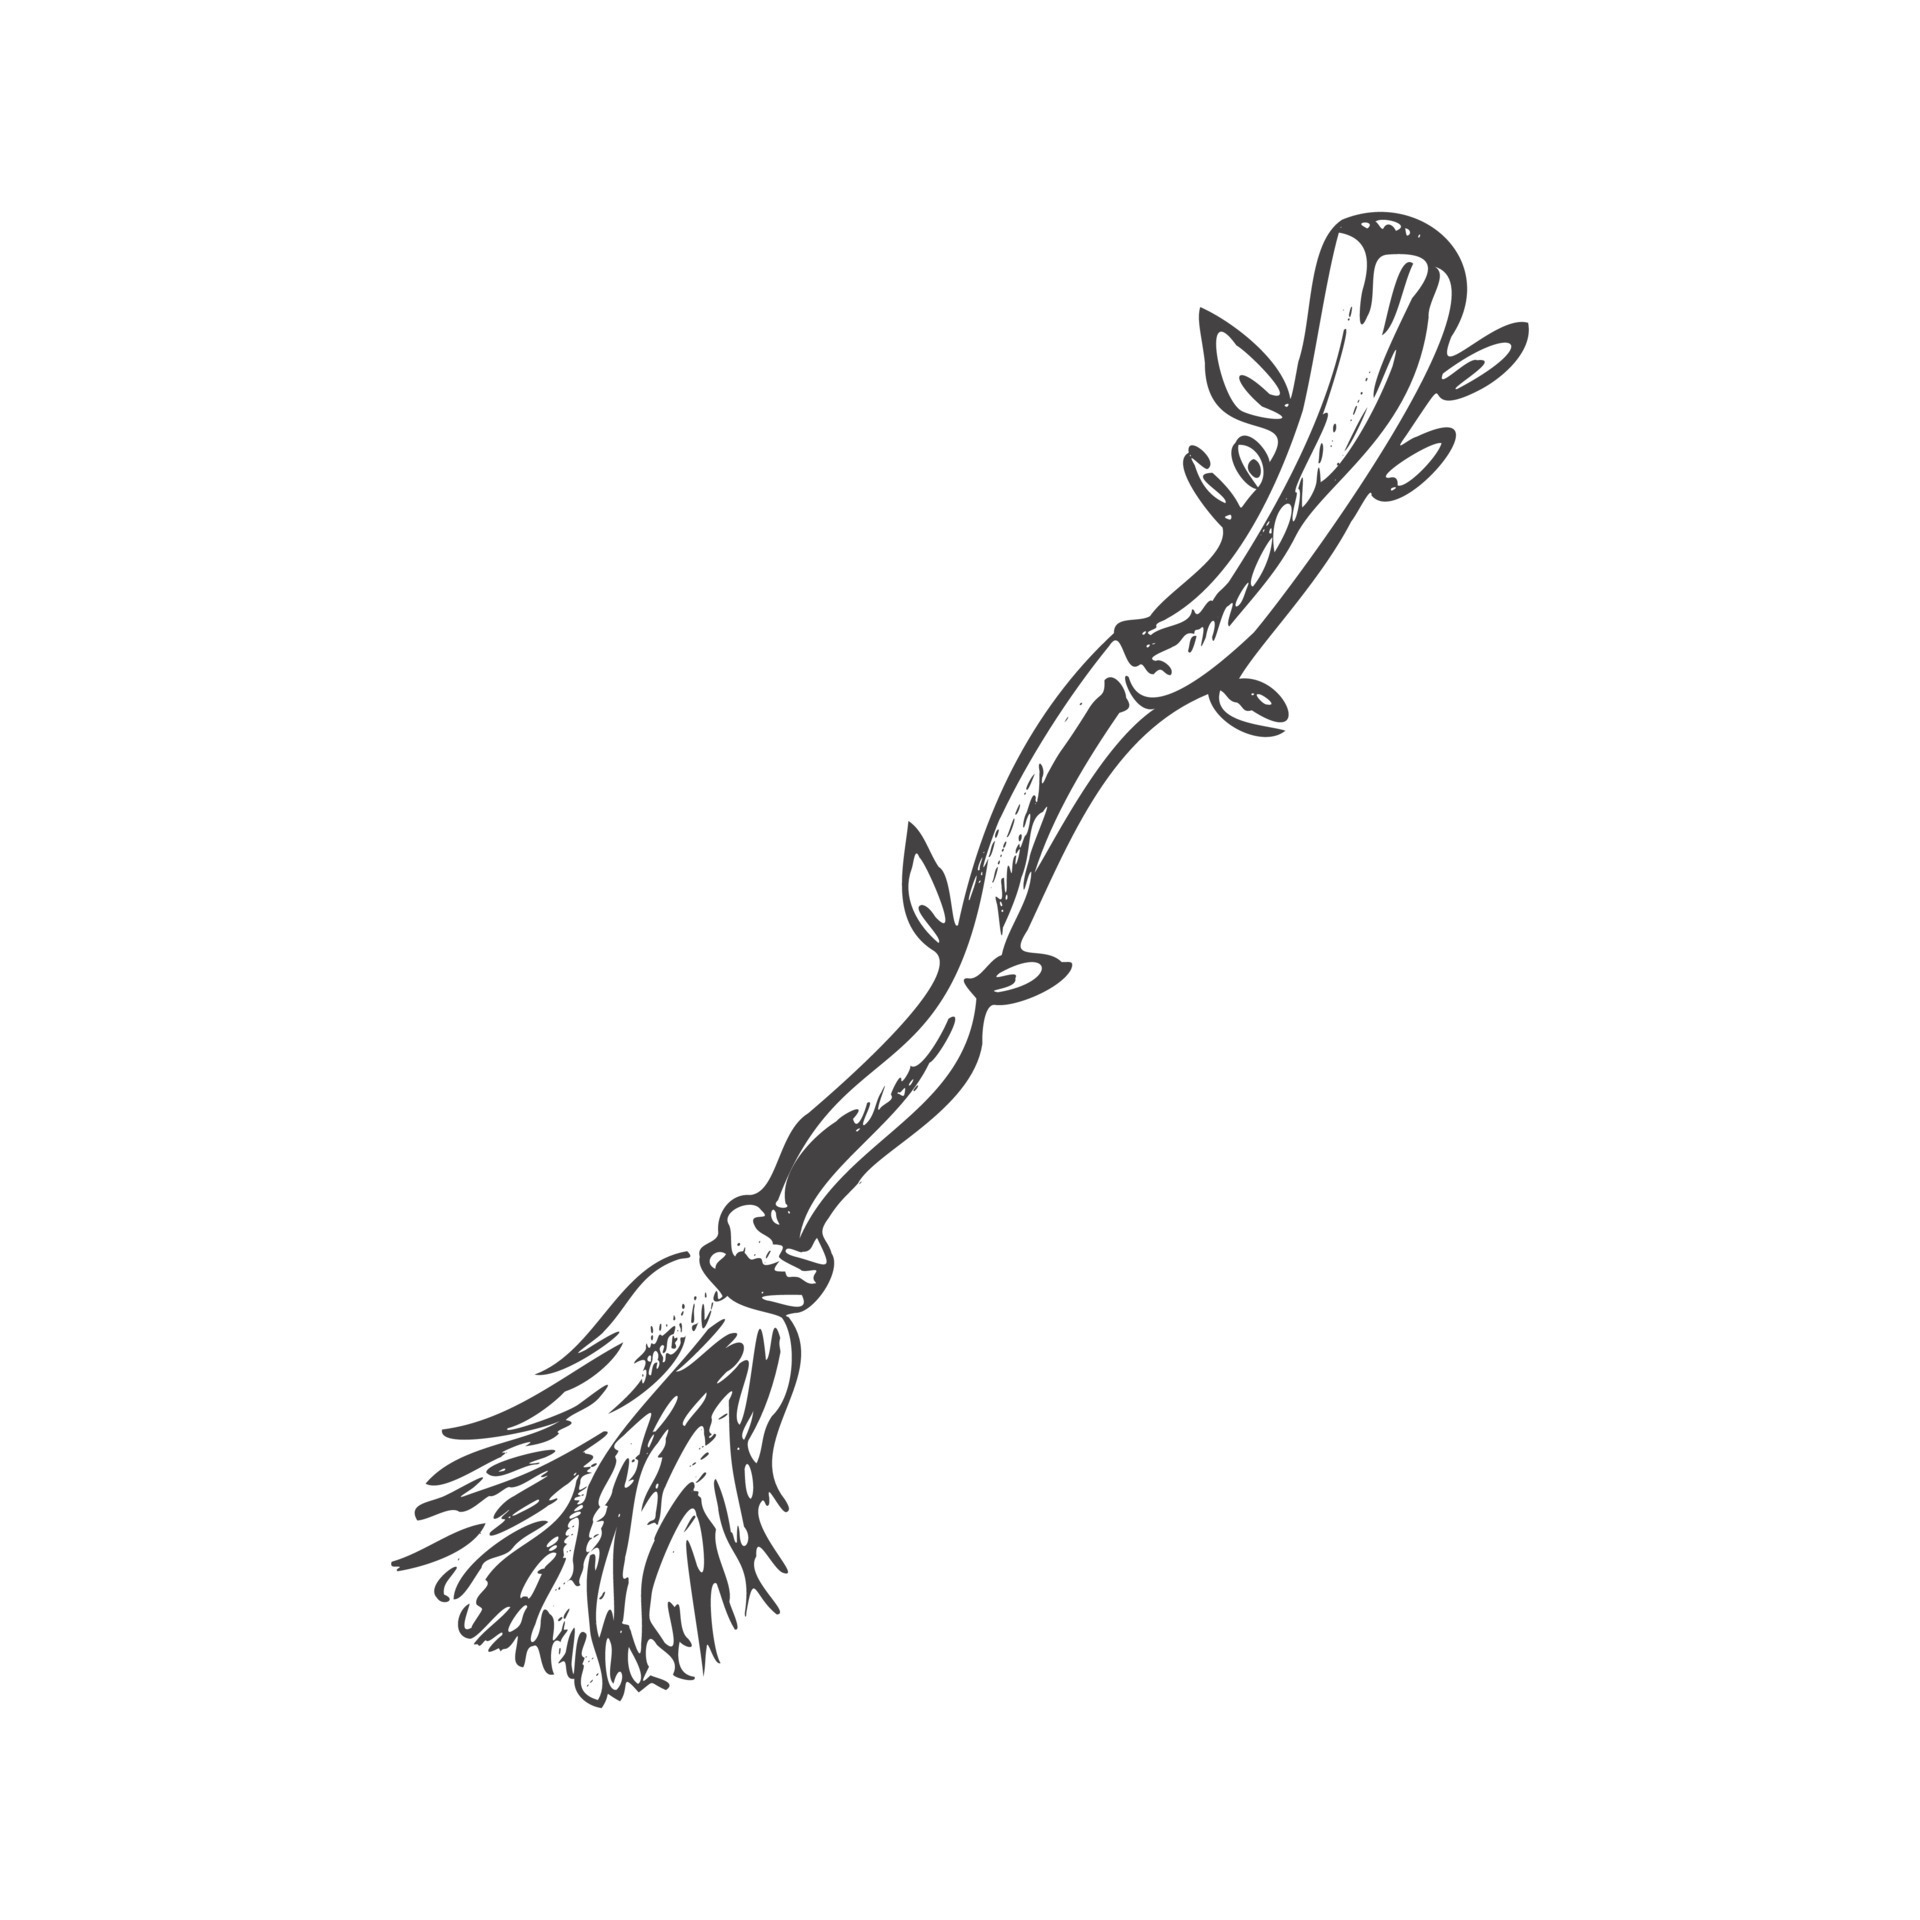 Hand drawn sketch of magic broom isolated on chalkboard background Element  of witchcraft Symbol of magic A vehicle for the witch Tattoo broomstick  or print for Halloween or all saints  day